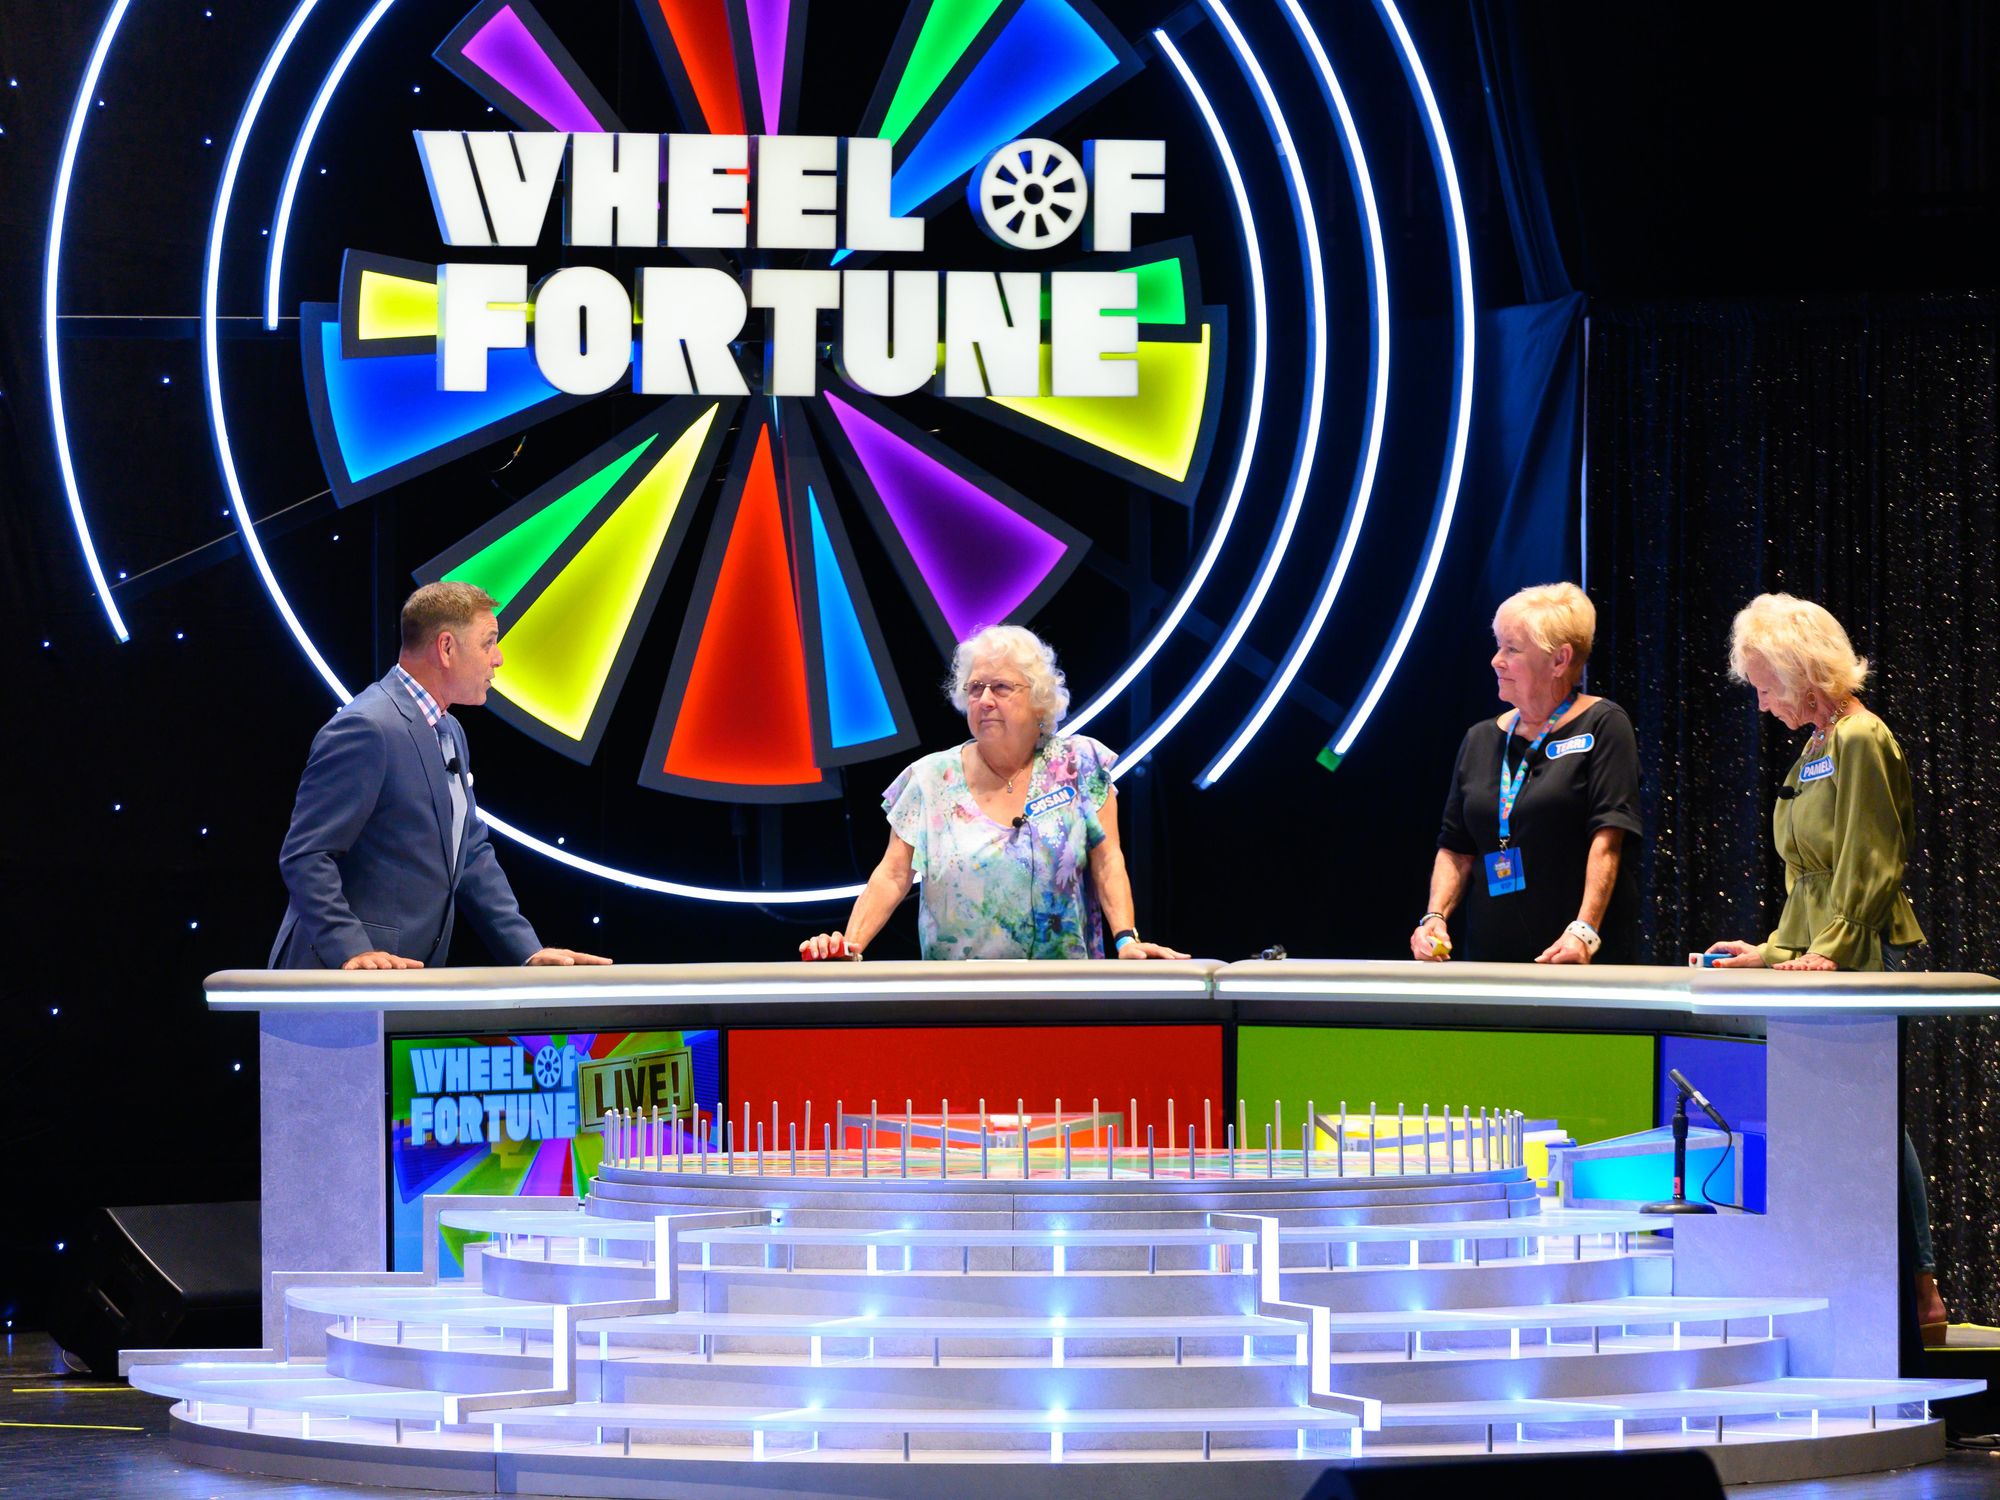 https://houston.culturemap.com/media-library/participants-on-wheel-of-fortune-live.jpg?id=32096402&width=2000&height=1500&quality=85&coordinates=269%2C0%2C406%2C0